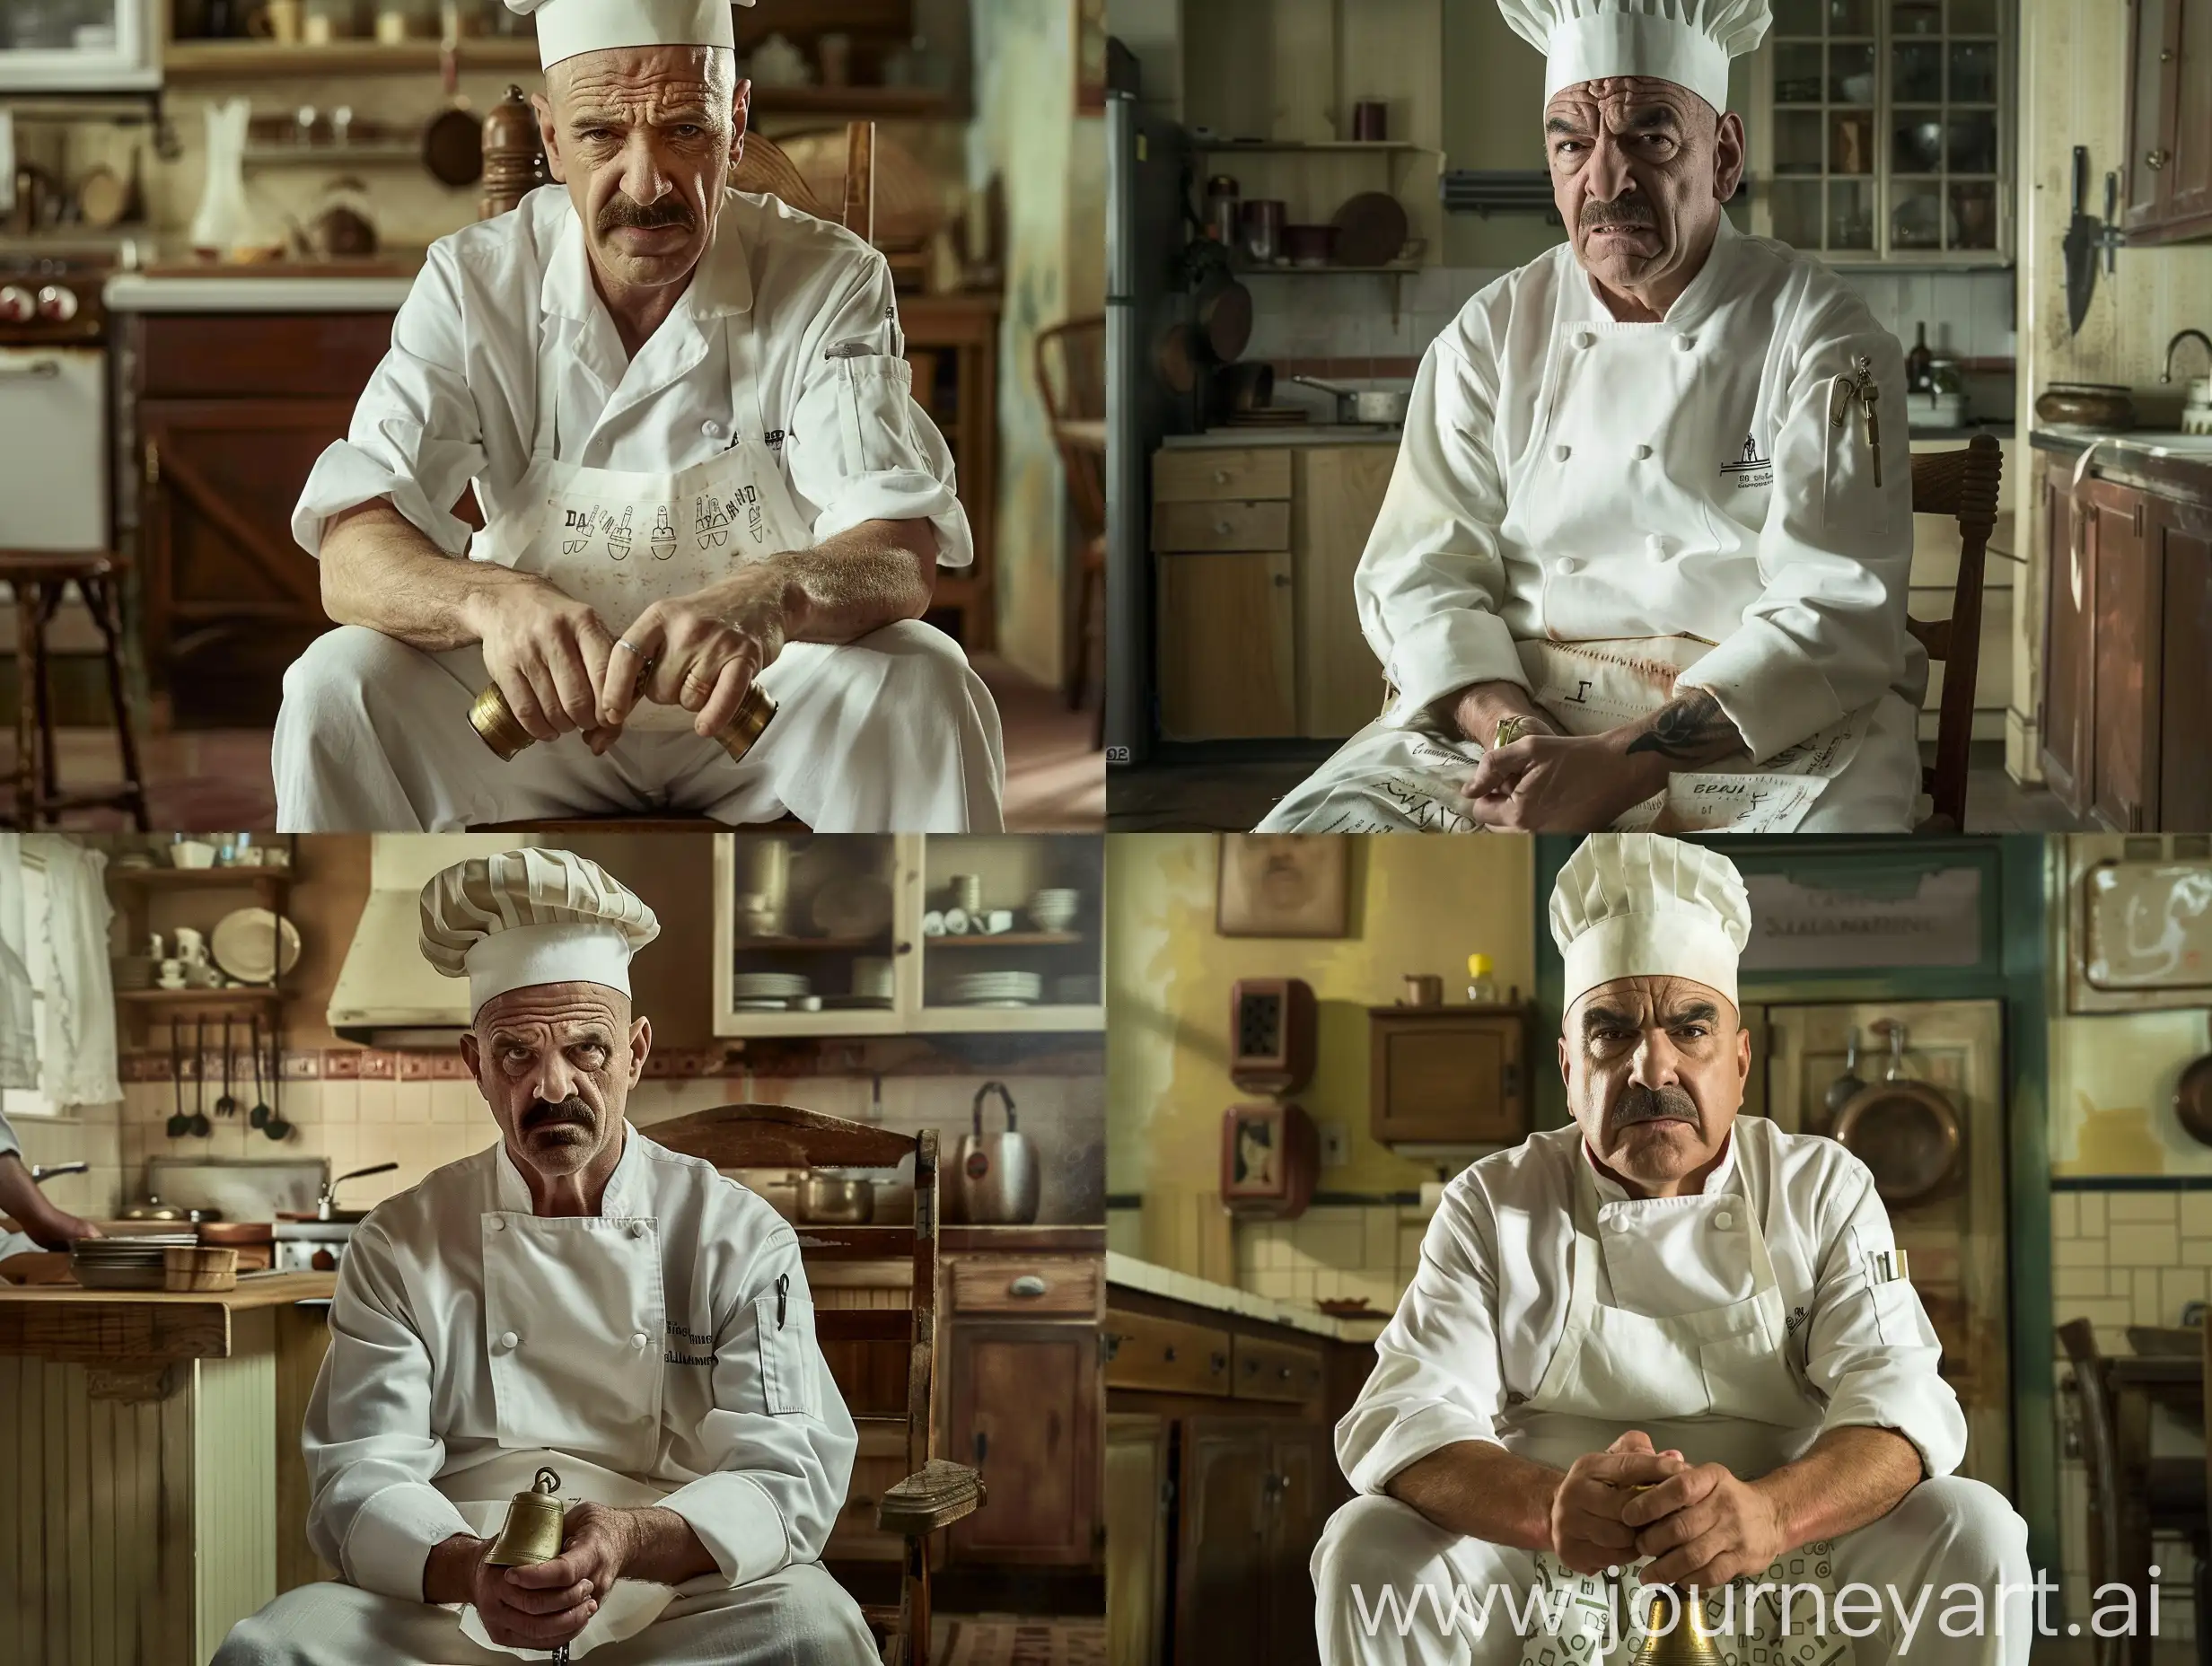 In Breaking Bad, Hector Salamanca (Mark Margulies) angrily rings the bell on Daredevil's right hand, Hector Salamanca (Mark Margulies) sits on an old wooden chair with The background of the kitchen is sitting. Hector Salamanca wears white chef uniform, Hector Salamanca wears chef hat, Hector Salamanca wears white kitchen apron with bell pattern, clear, realistic, modern lighting, q2